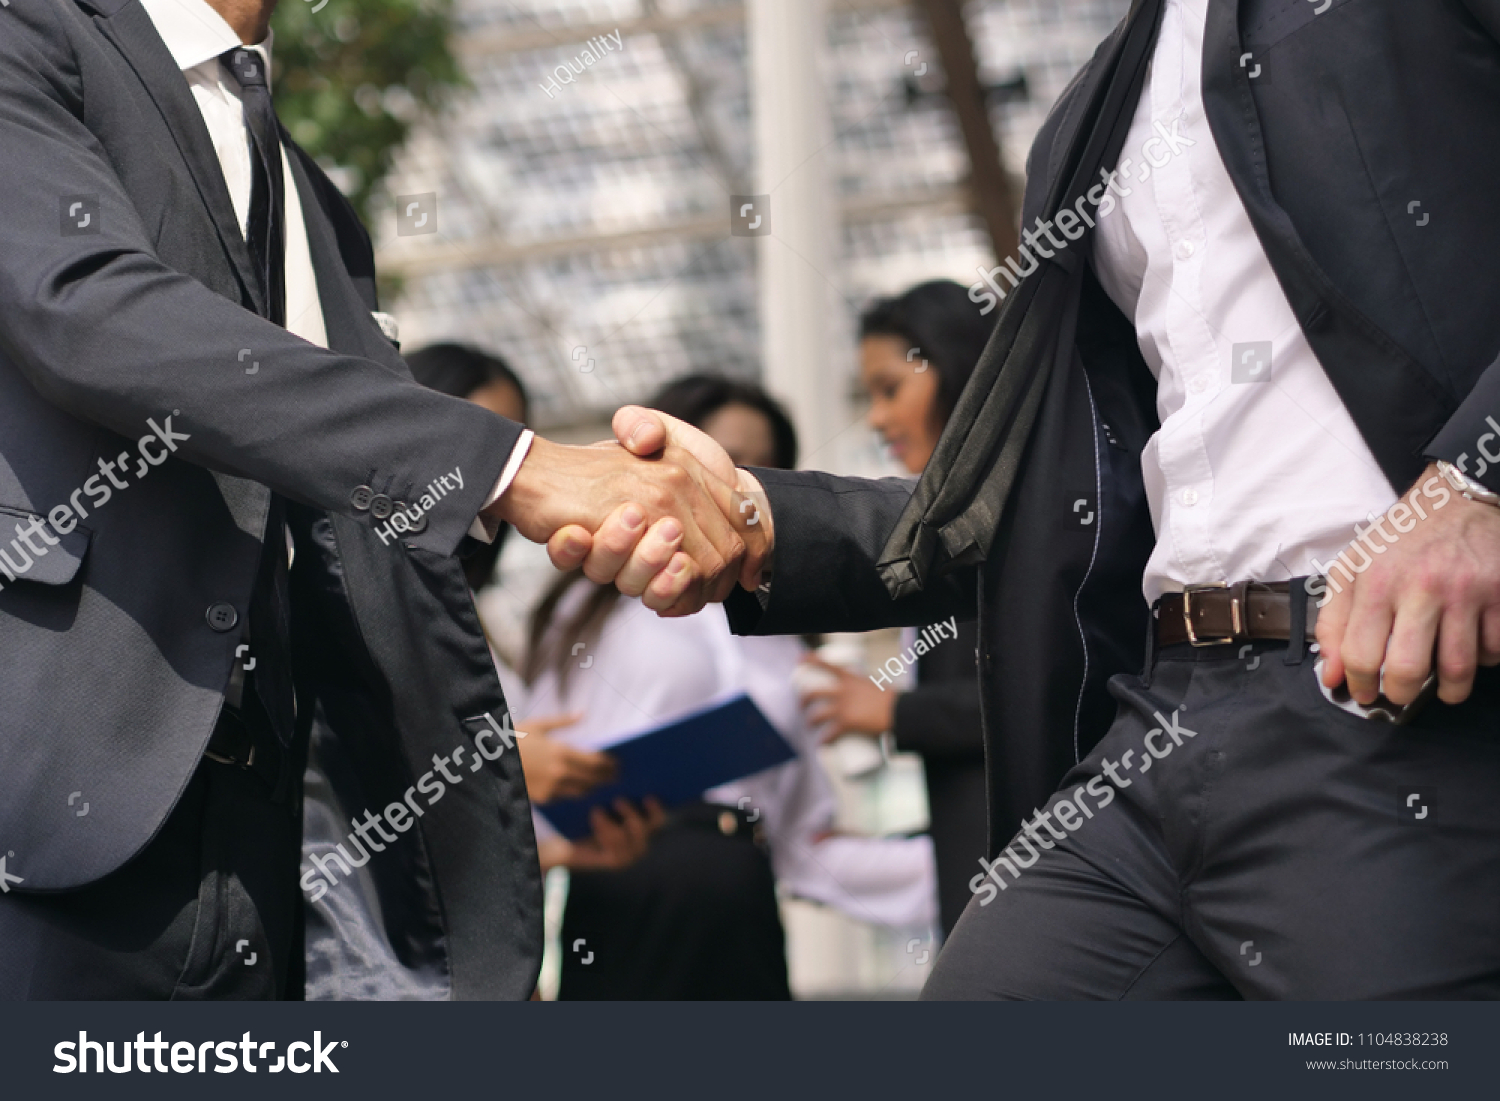 A man and a woman business, of different ethnicities, shake hands and then talk about finance looking at the patterns of economic markets and banks. Concept of: success and team #1104838238